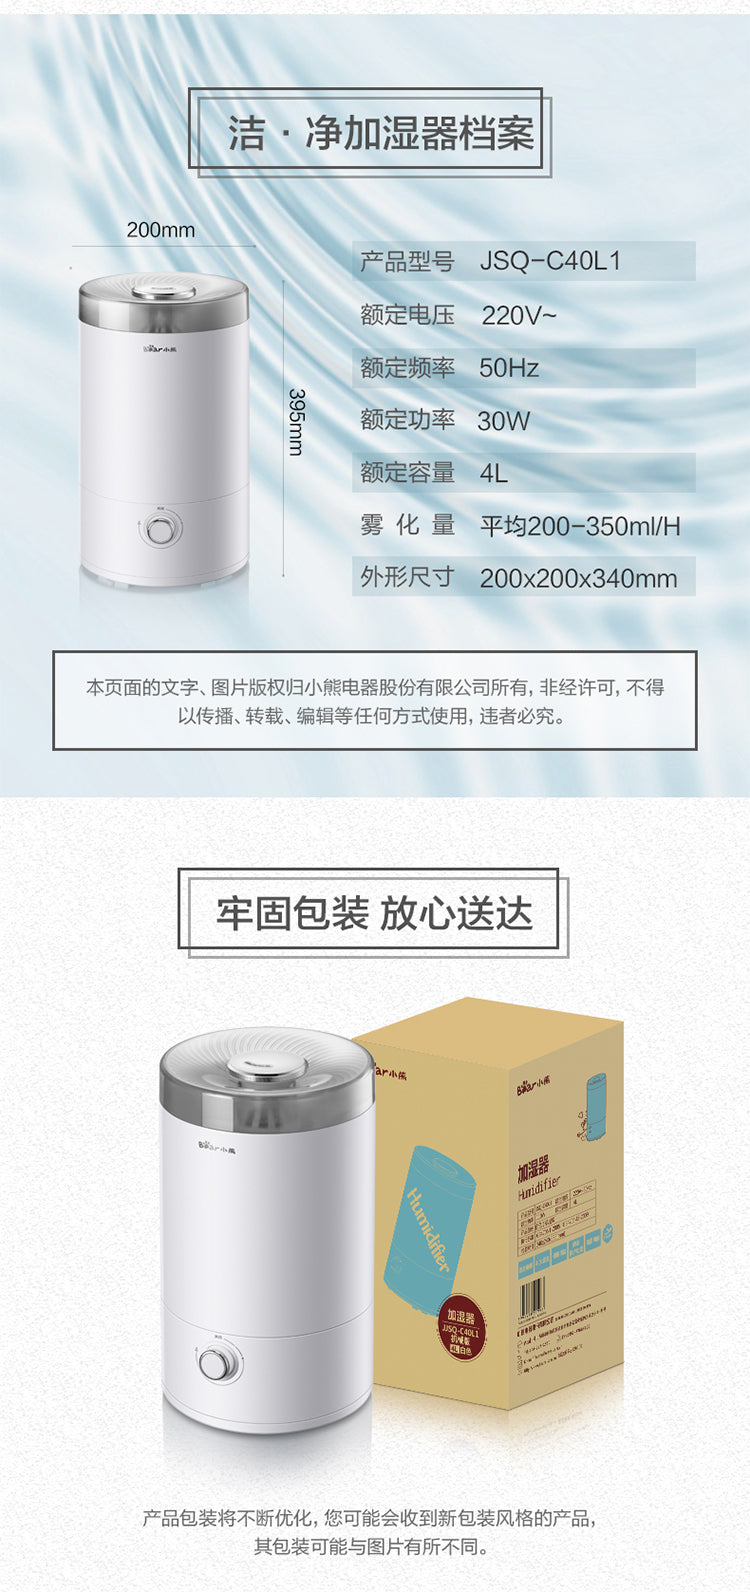 Bear JSQ-C40Q1 ULTRASONIC AIR HUMIDIFIER/Add Water from Top/ 4L LARGE CAPACITY/ AROMA DIFFUSER/ SG Plug/ Up to 12 Months SG Warranty